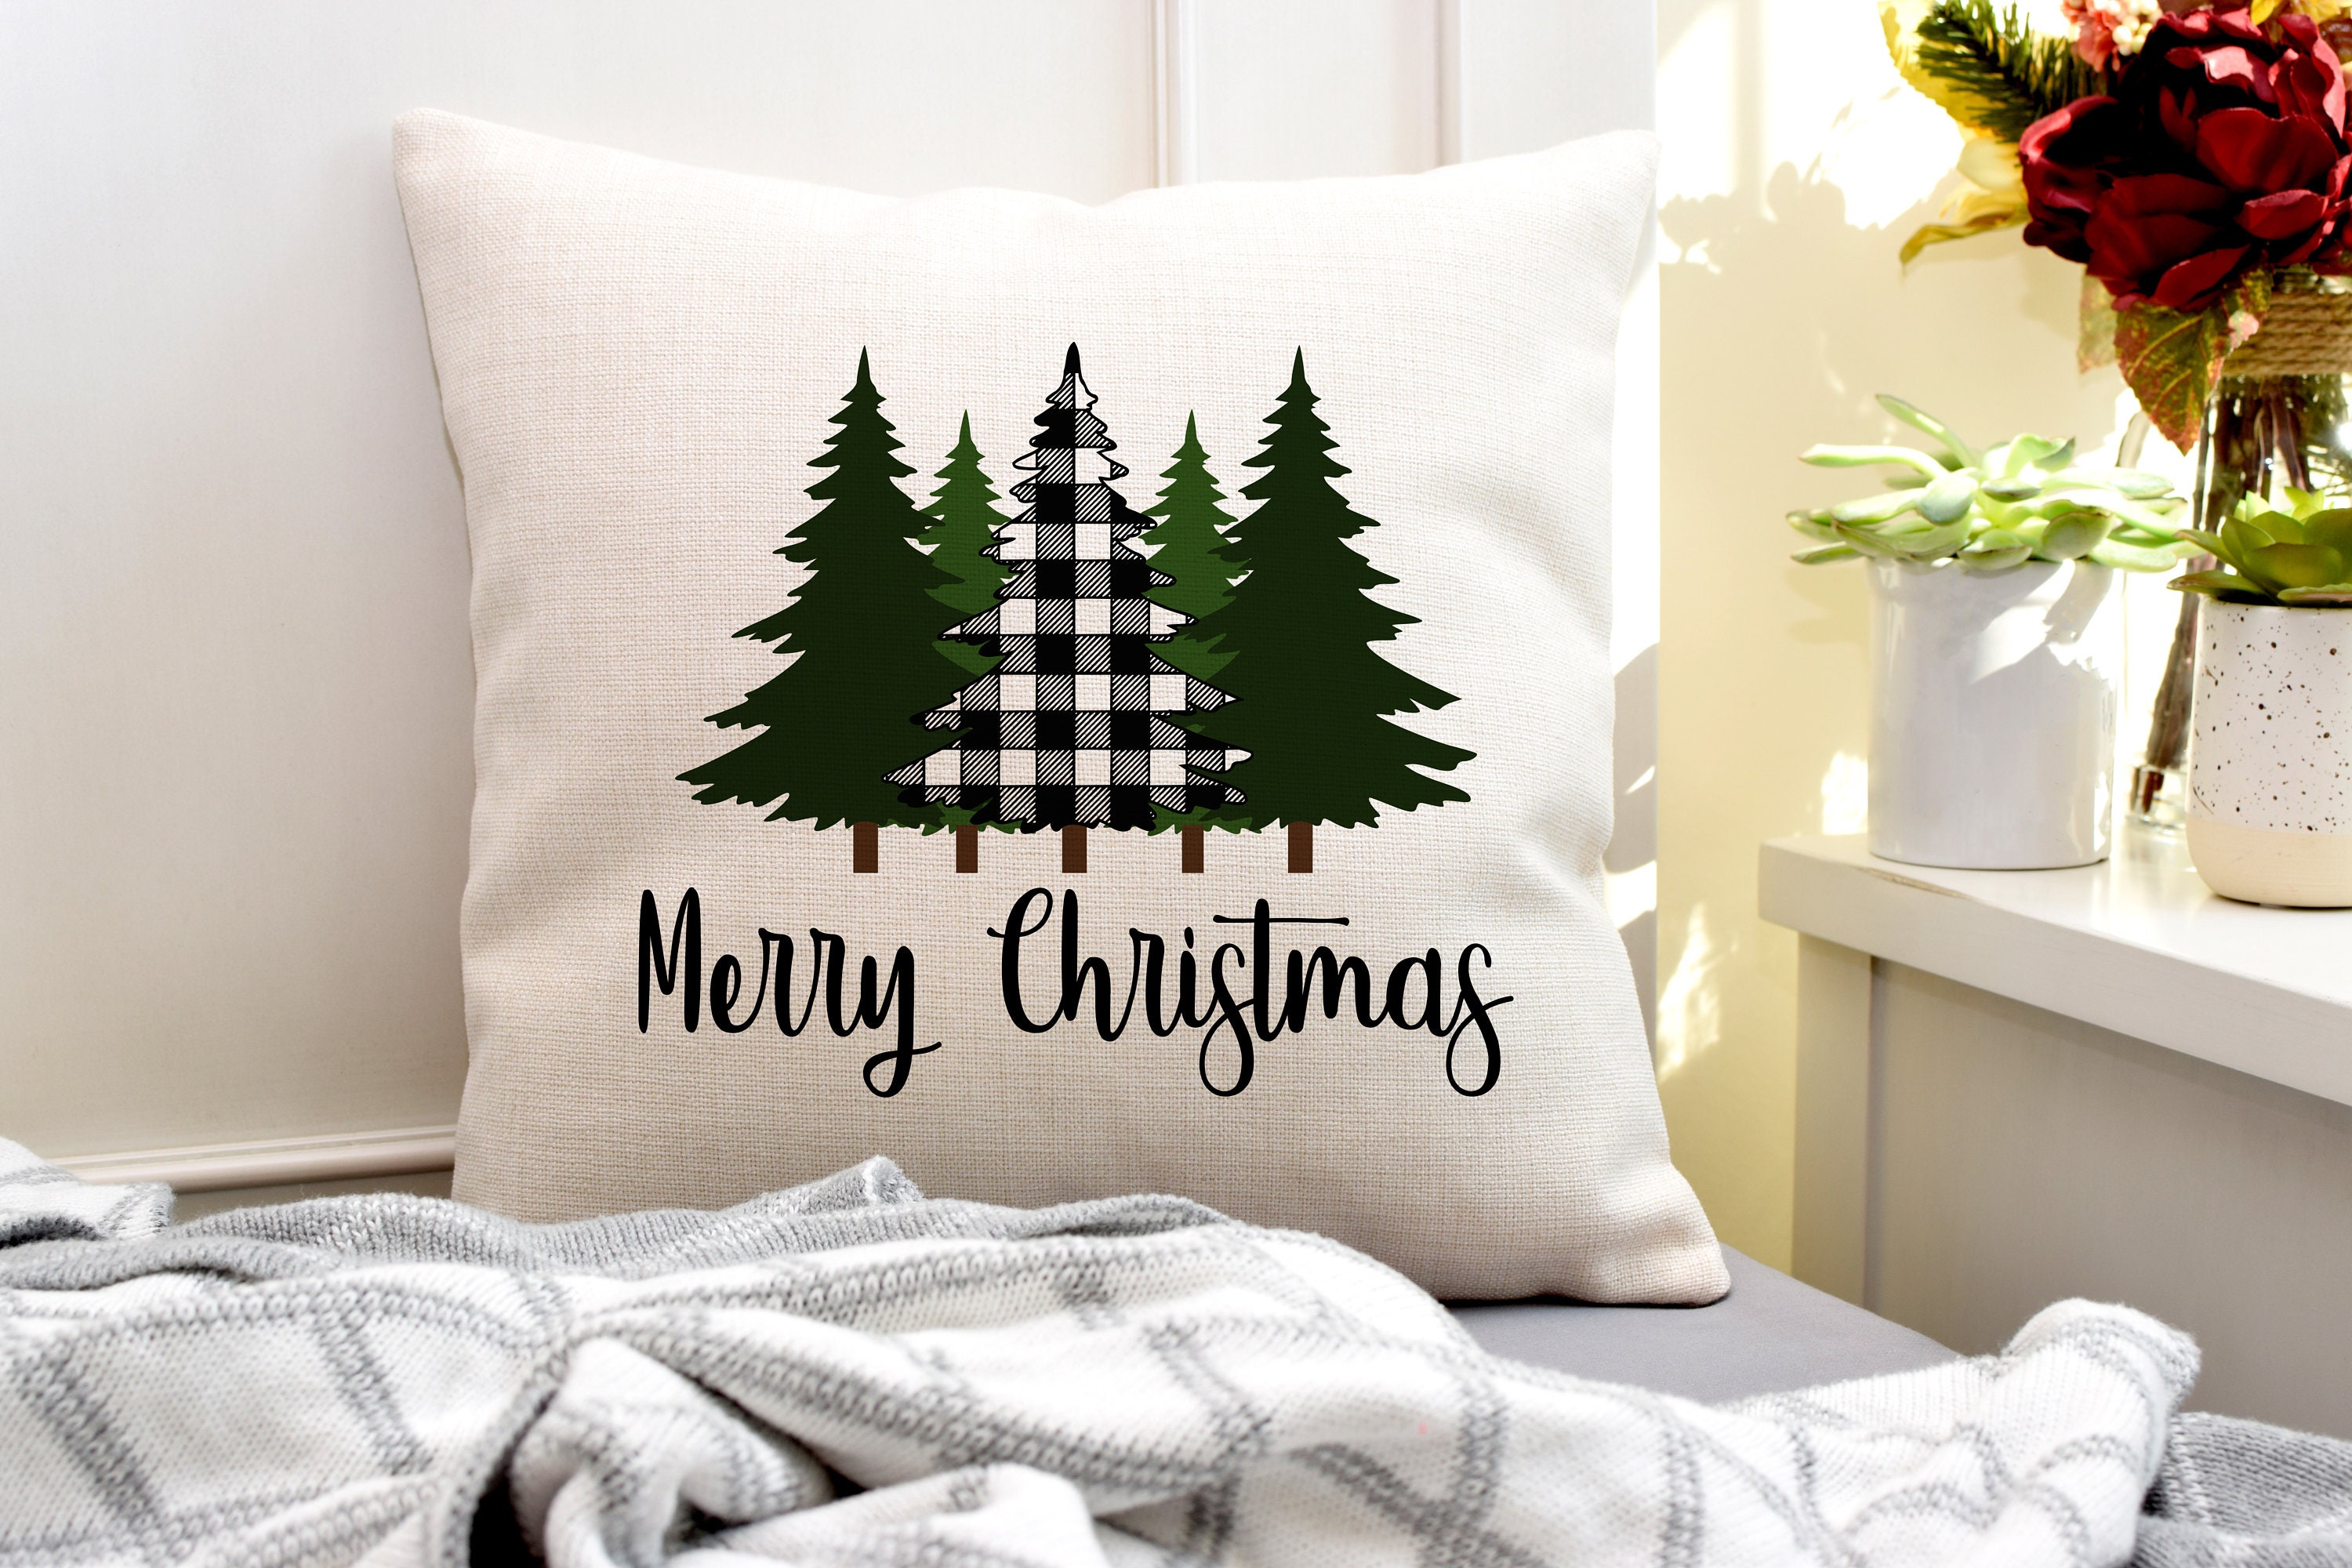 Embroidered Christmas Trees & Plaid Pillow